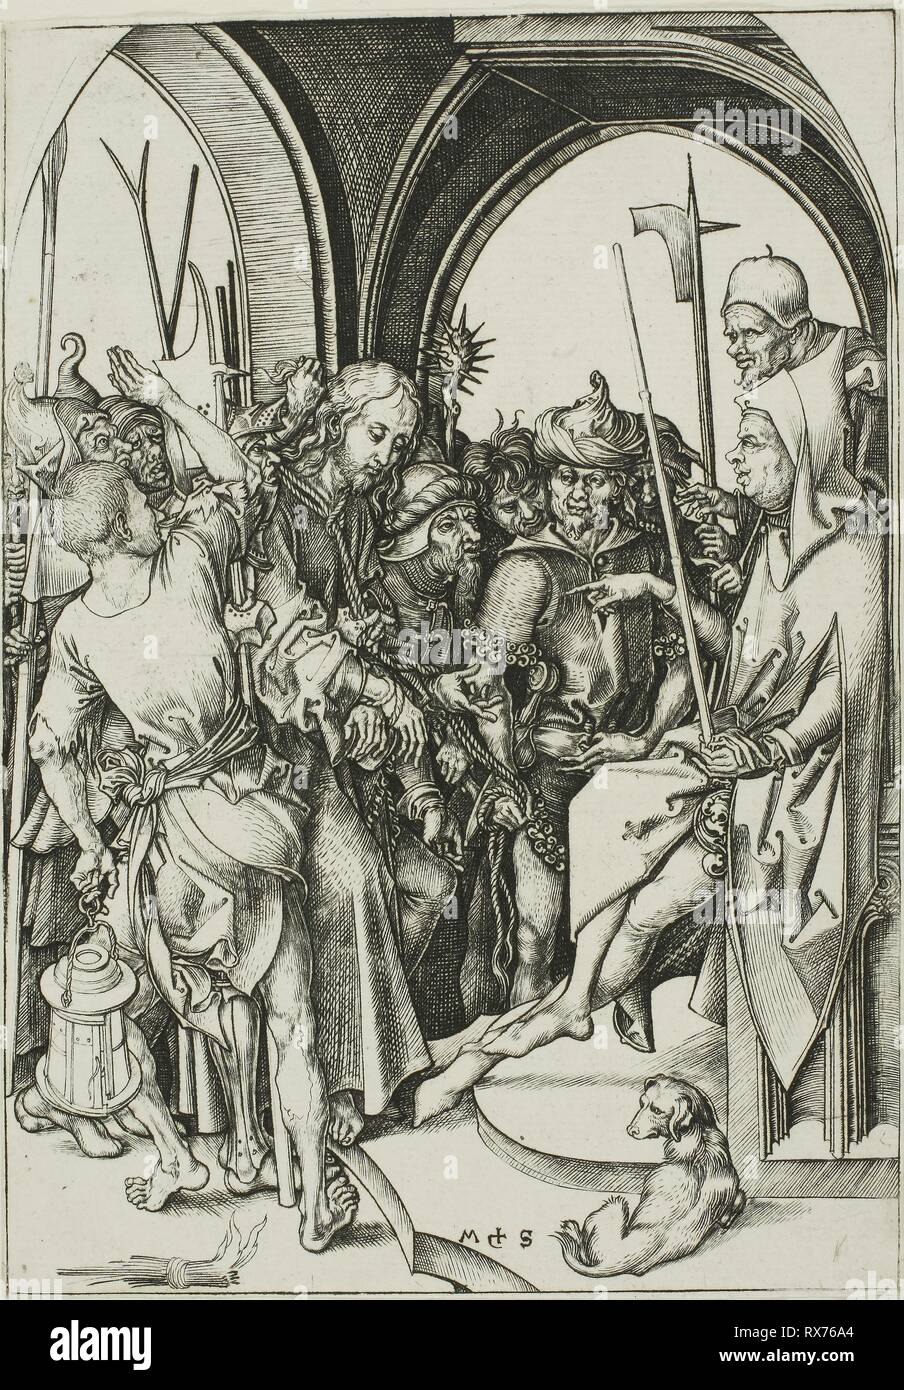 Christ Before Annas. Martin Schongauer; German, c. 1450-1491. Date: 1475-1486. Dimensions: 163 x 114 mm (sheet trimmed within plate mark). Engraving on paper. Origin: Germany. Museum: The Chicago Art Institute. Stock Photo